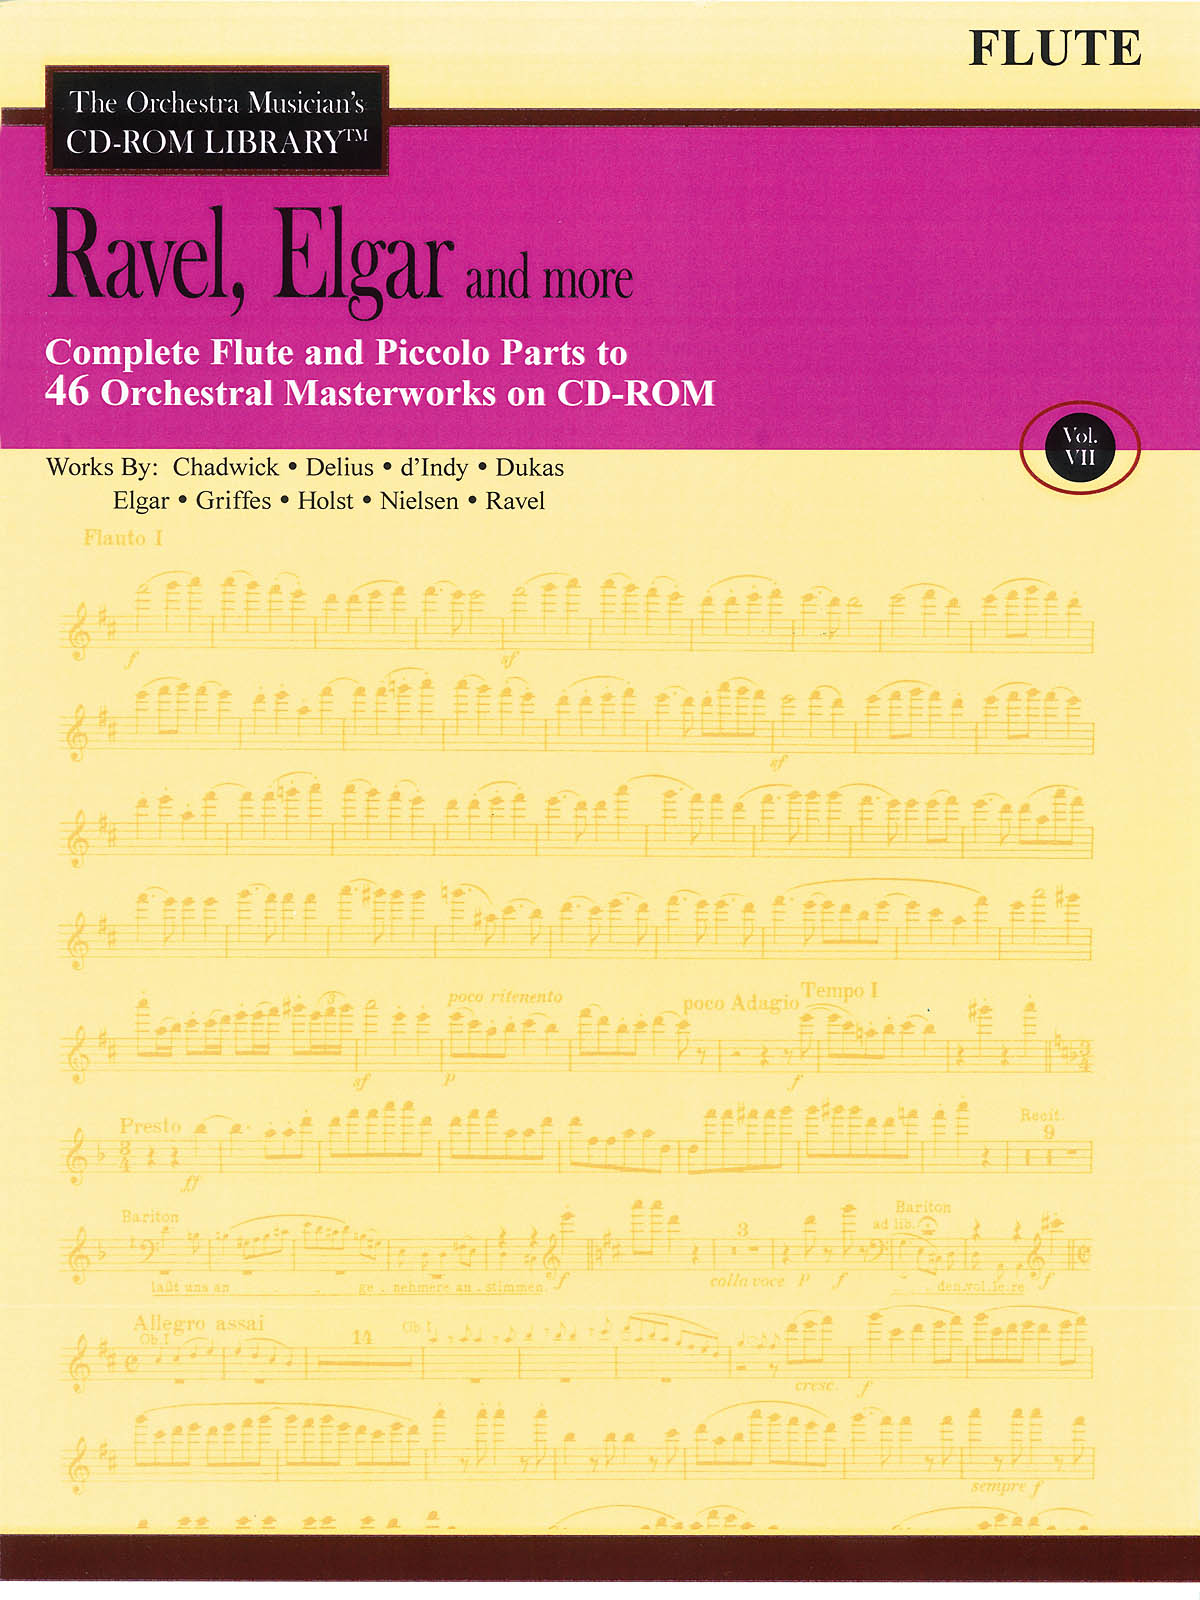 Ravel, Elgar and More - Volume 7(The Orchestra Musician's CD-ROM Library - Flute)